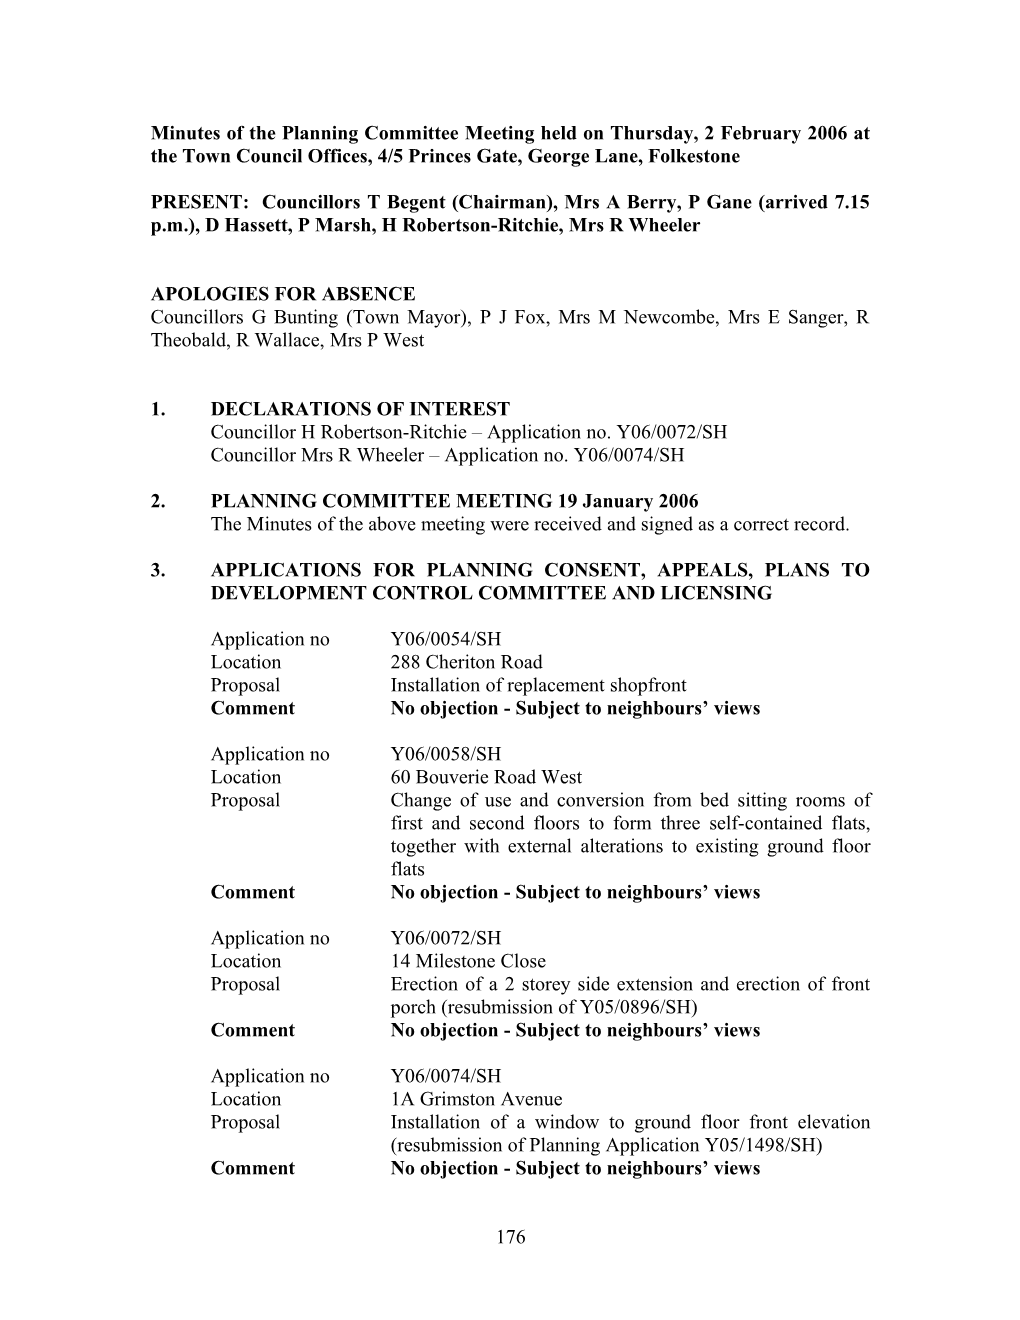 Minutes of the Planning Committee Meeting Held on Thursday, 2 February 2006 at the Town